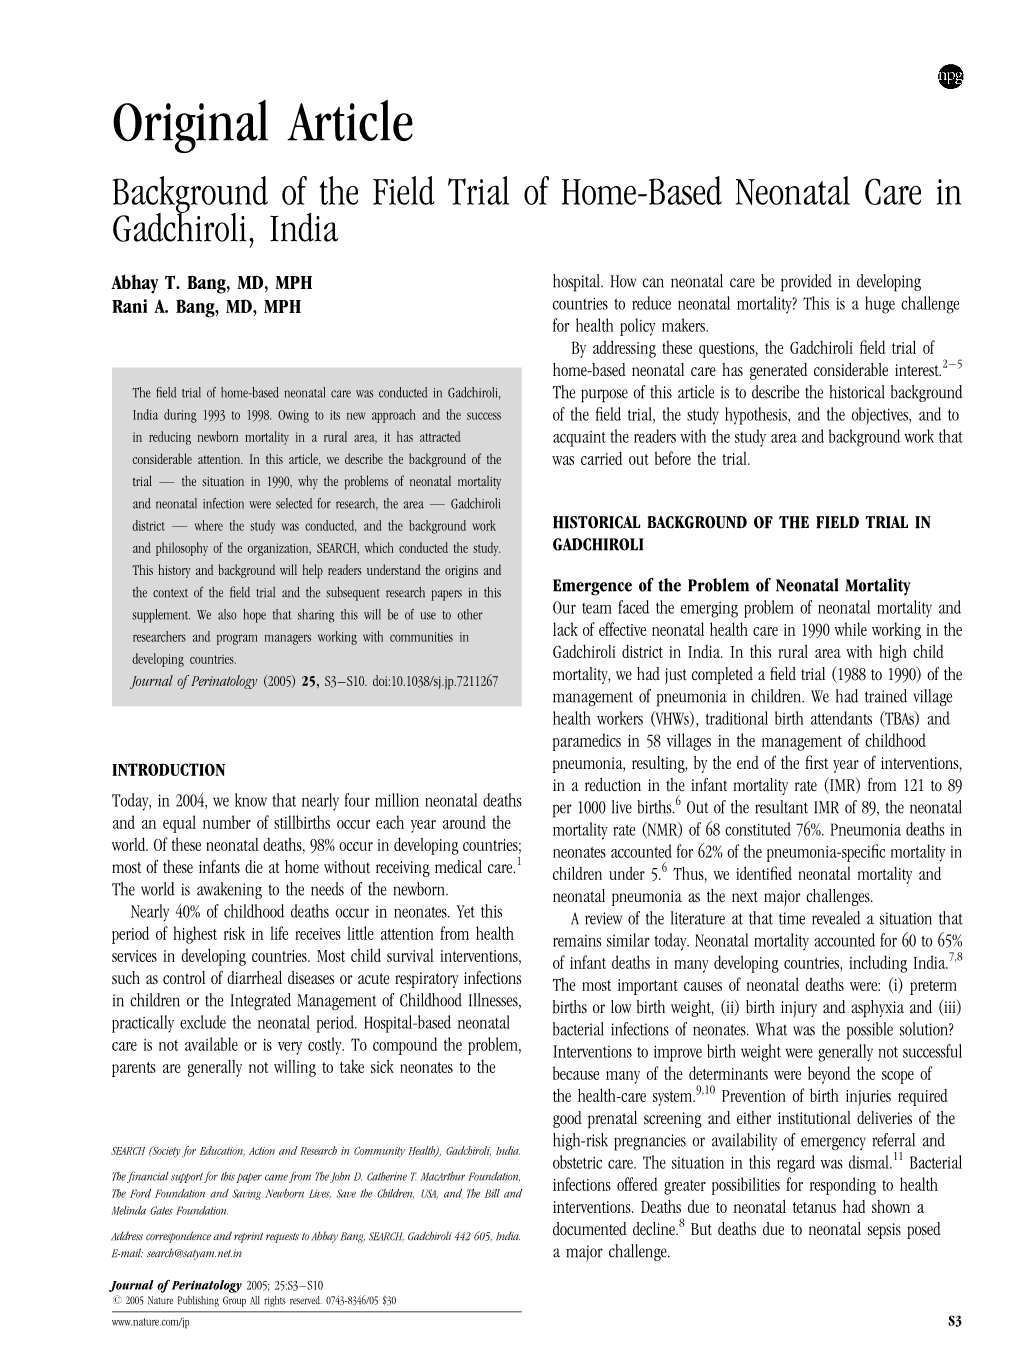 Background of the Field Trial of Home-Based Neonatal Care in Gadchiroli, India